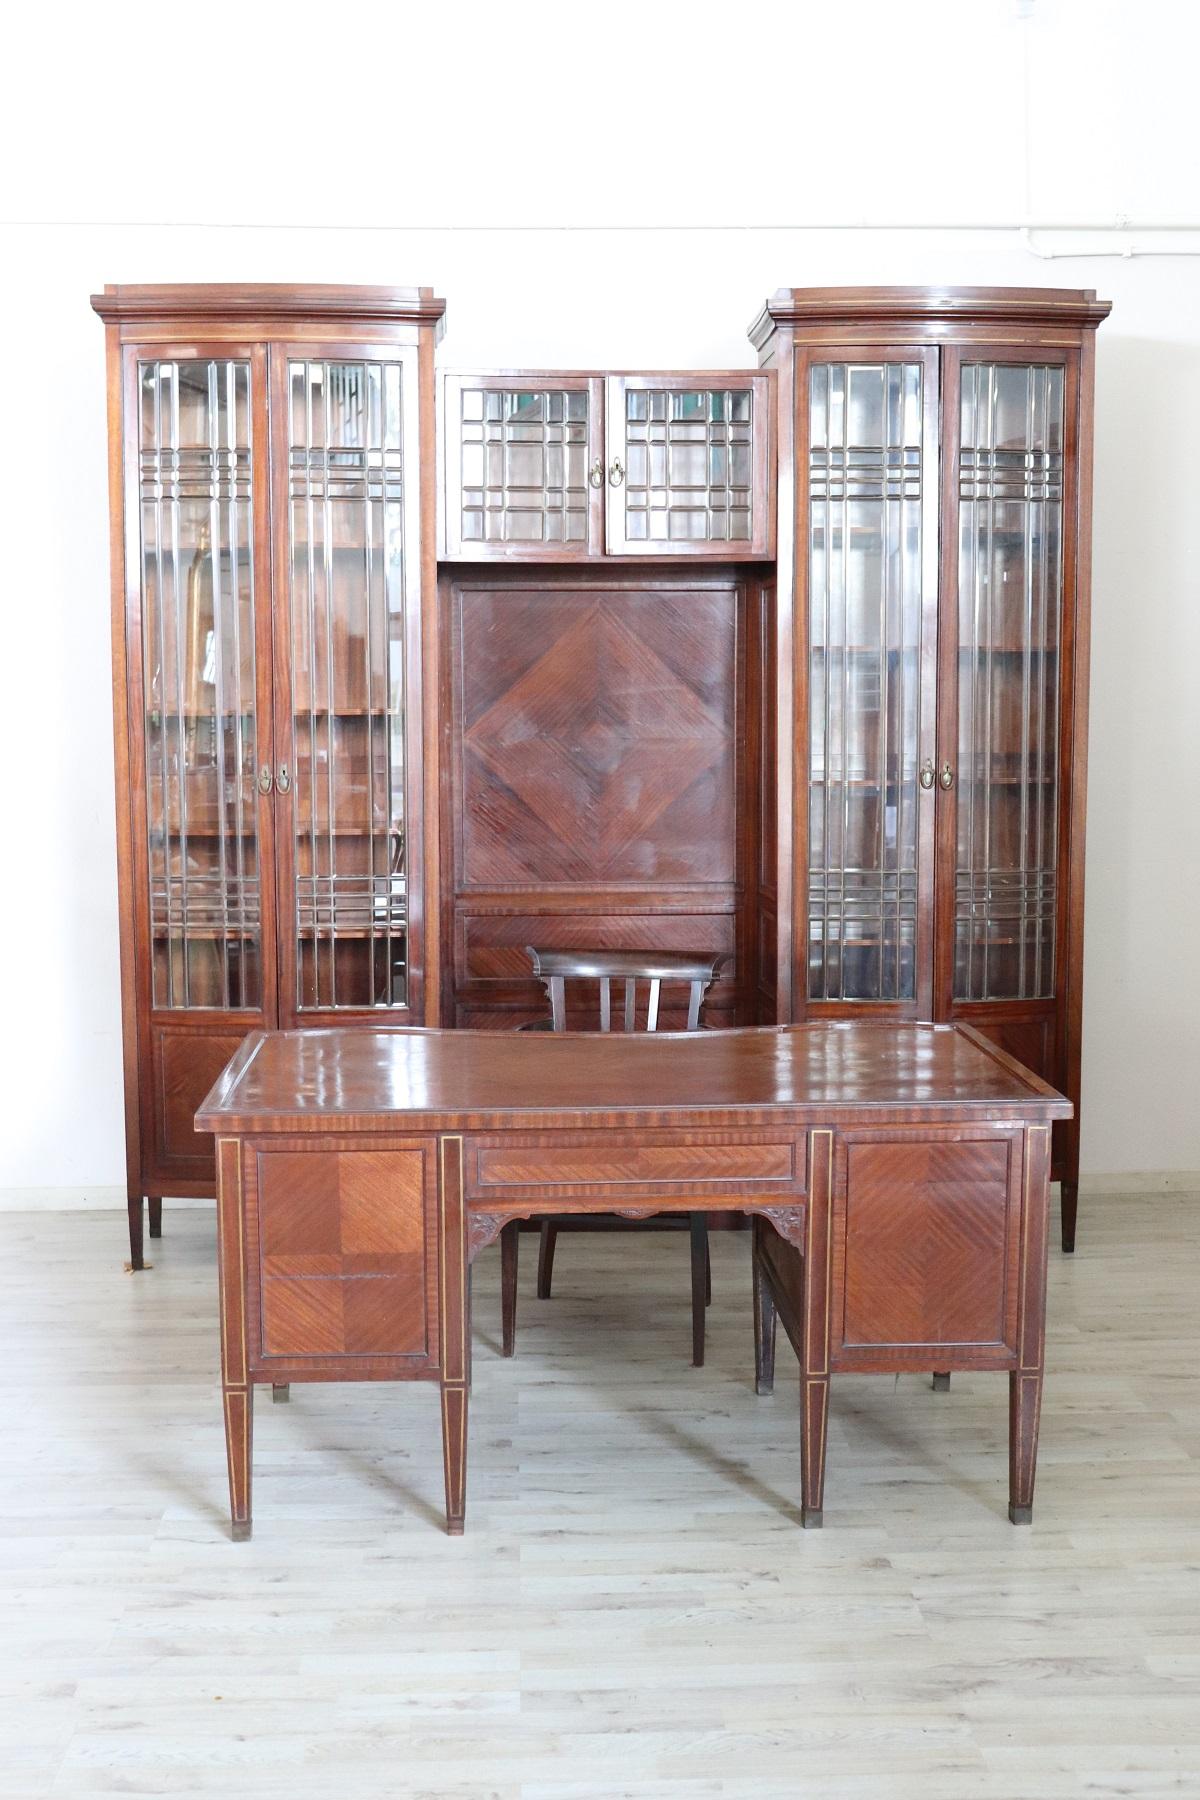 Refined and rare office furniture set, early 20th century in mahogany wood. Precious original glass. Geometric inlaid decorations in golden brass. Present brand of the Italian cabinet makers Spano and Solari who produced fine furniture in the city